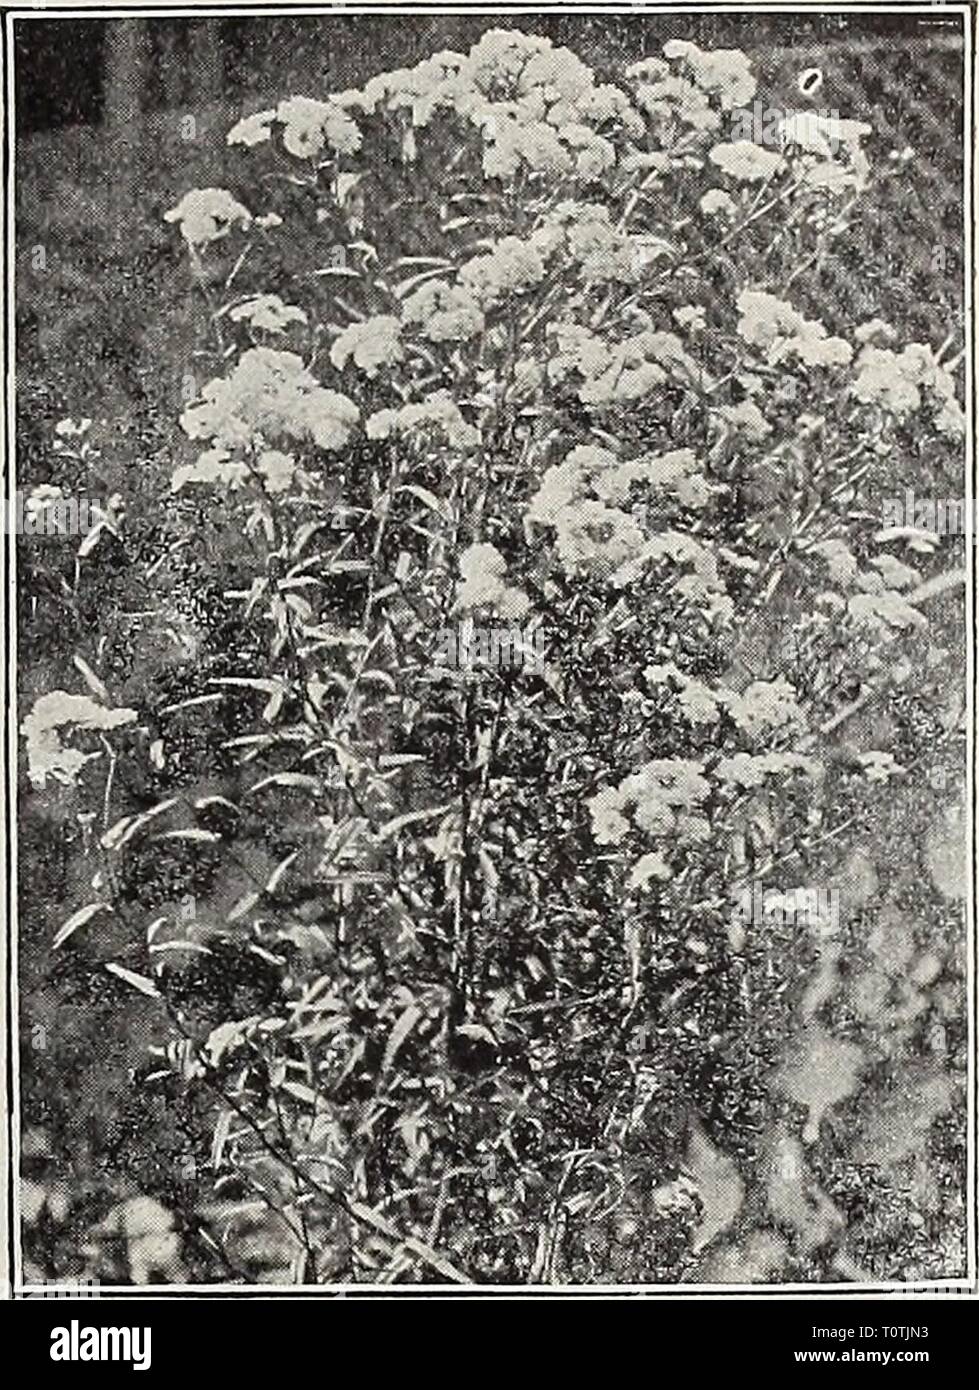 Dreer's 1907 garden book (1907) Dreer's 1907 garden book  dreers1907garden1907henr Year: 1907  General List of Hardy Perennial Plants For New and Rare Varieties see pages 152 to 156. ACiENA (New Zealand Bur). Pretty evergreen rock plants of cushion-like growth, cultivated for their showy crimson spines, which are borne on the calyx. Buchanani. Glaucous green fern-like foliage. 25 cts. each ; $2.50 per doz. nicrophylla. Pretty dark bronze foliage. 25 cts. each ; $2.50 per doz. ACANTHOLIMON (Priefcly Thrift). Qlumaceum. Pine-like evergreen leaves, forming a tuft 3 inches high; bright pink flower Stock Photo